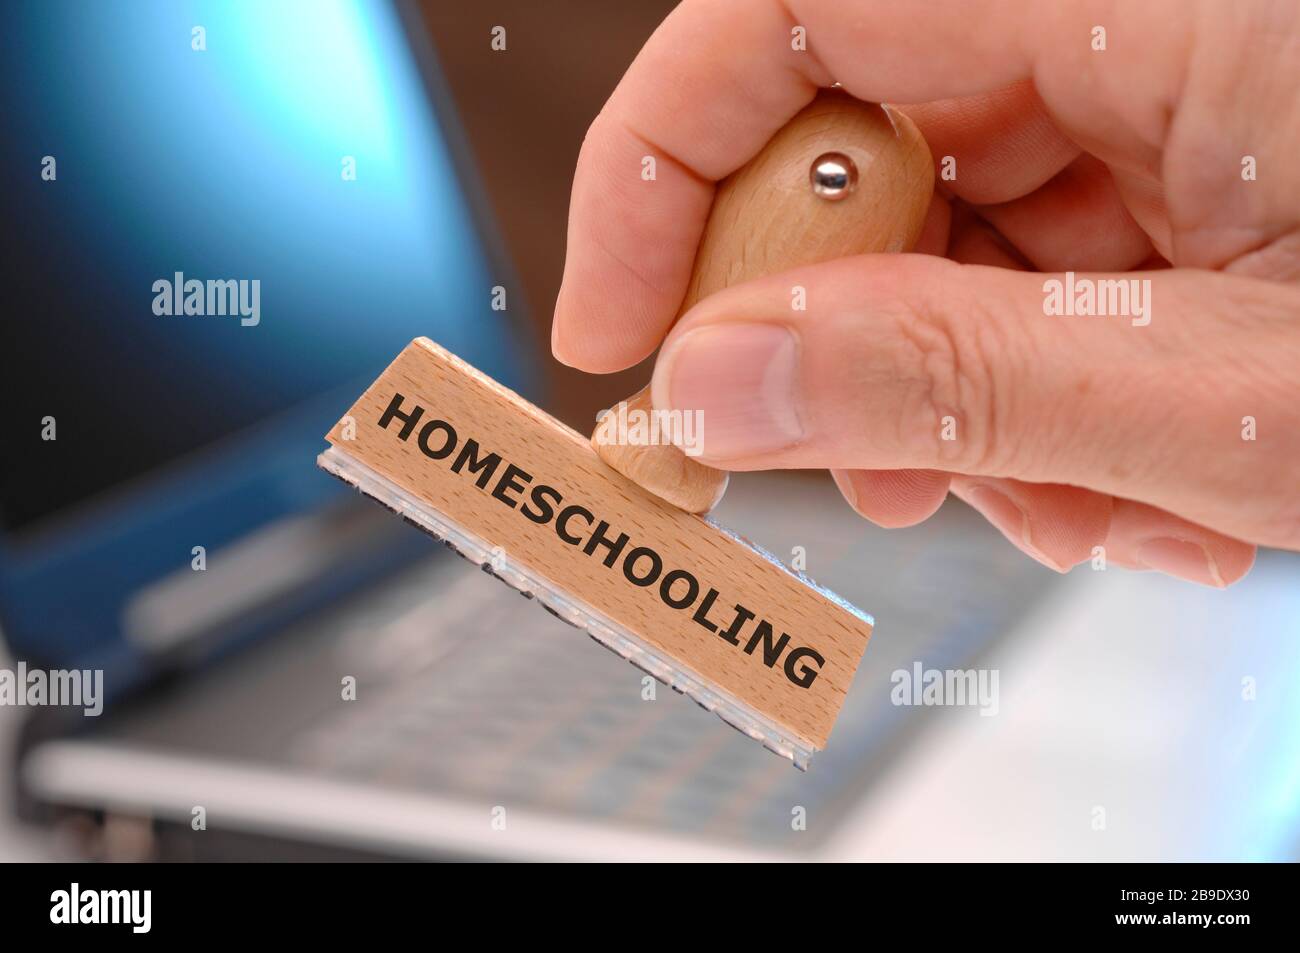 homeschooling printed on rubber stamp Stock Photo